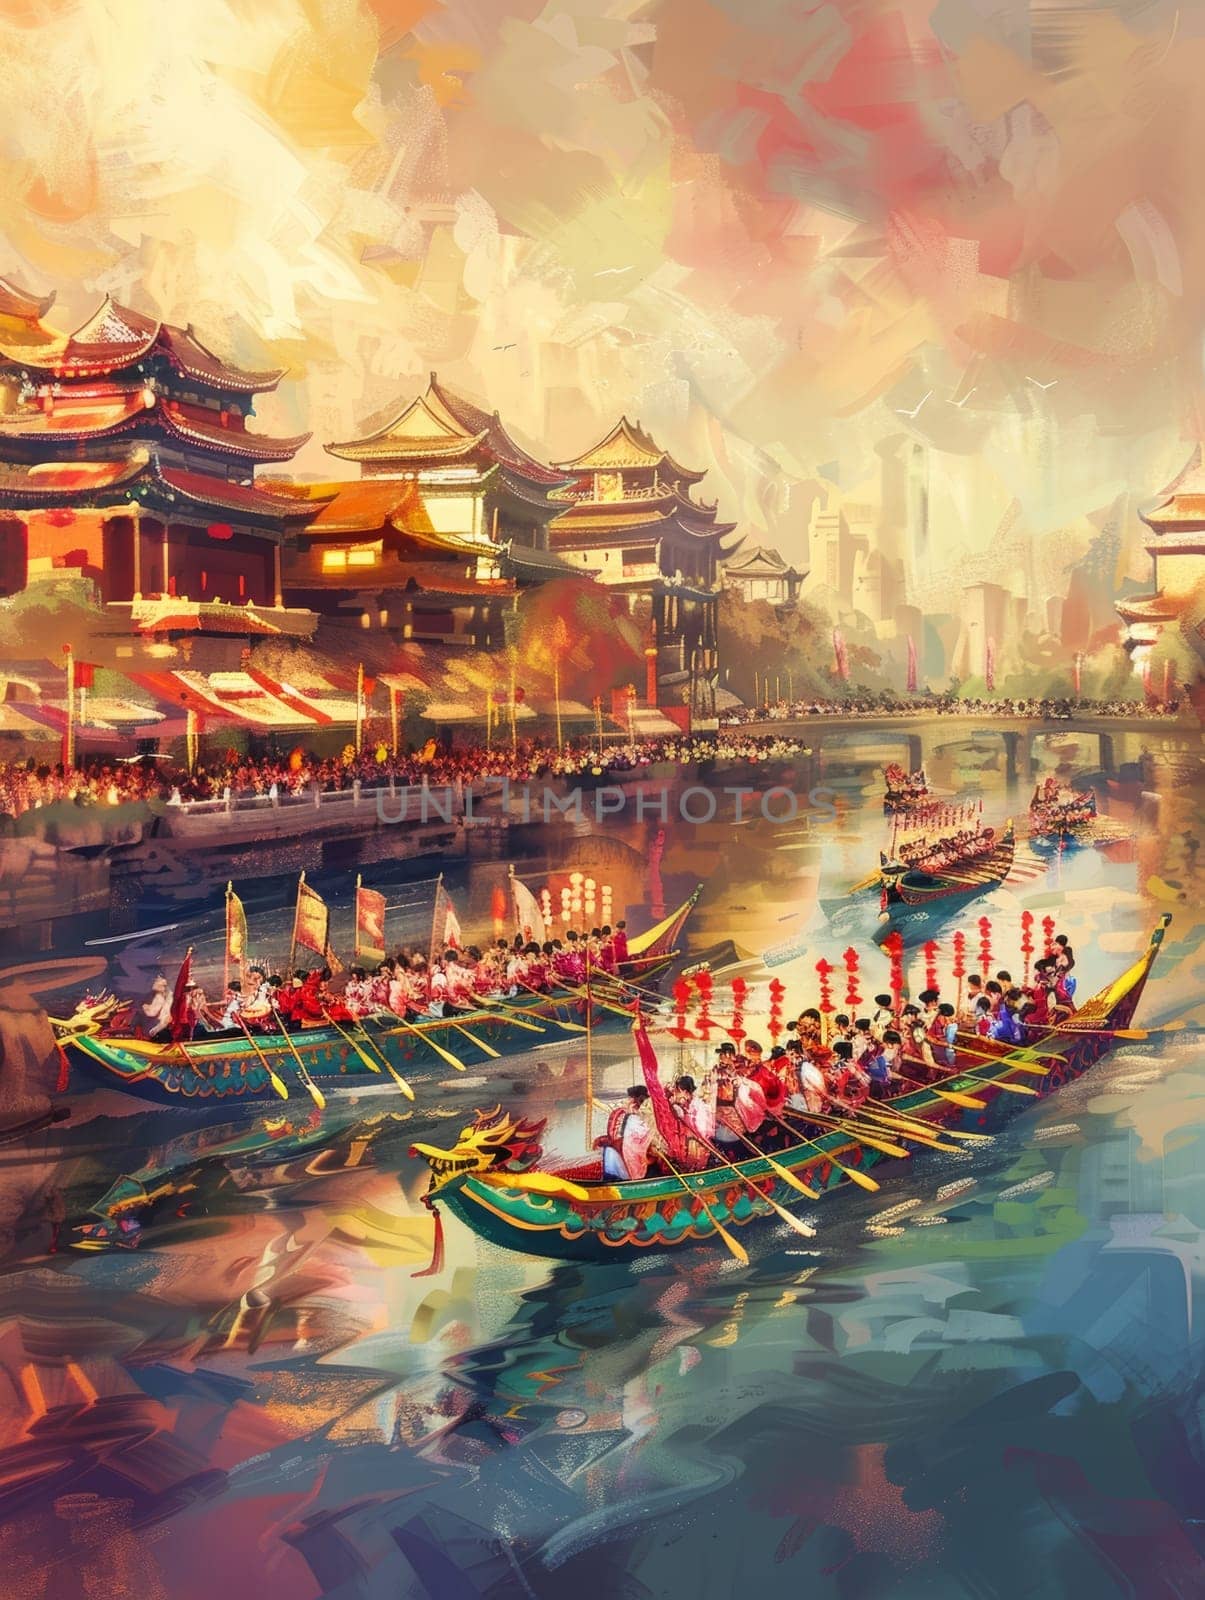 Ethereal light bathes dragon boats and traditional pagodas during a festival, highlighting a harmonious blend of culture and spirited festivity. by sfinks